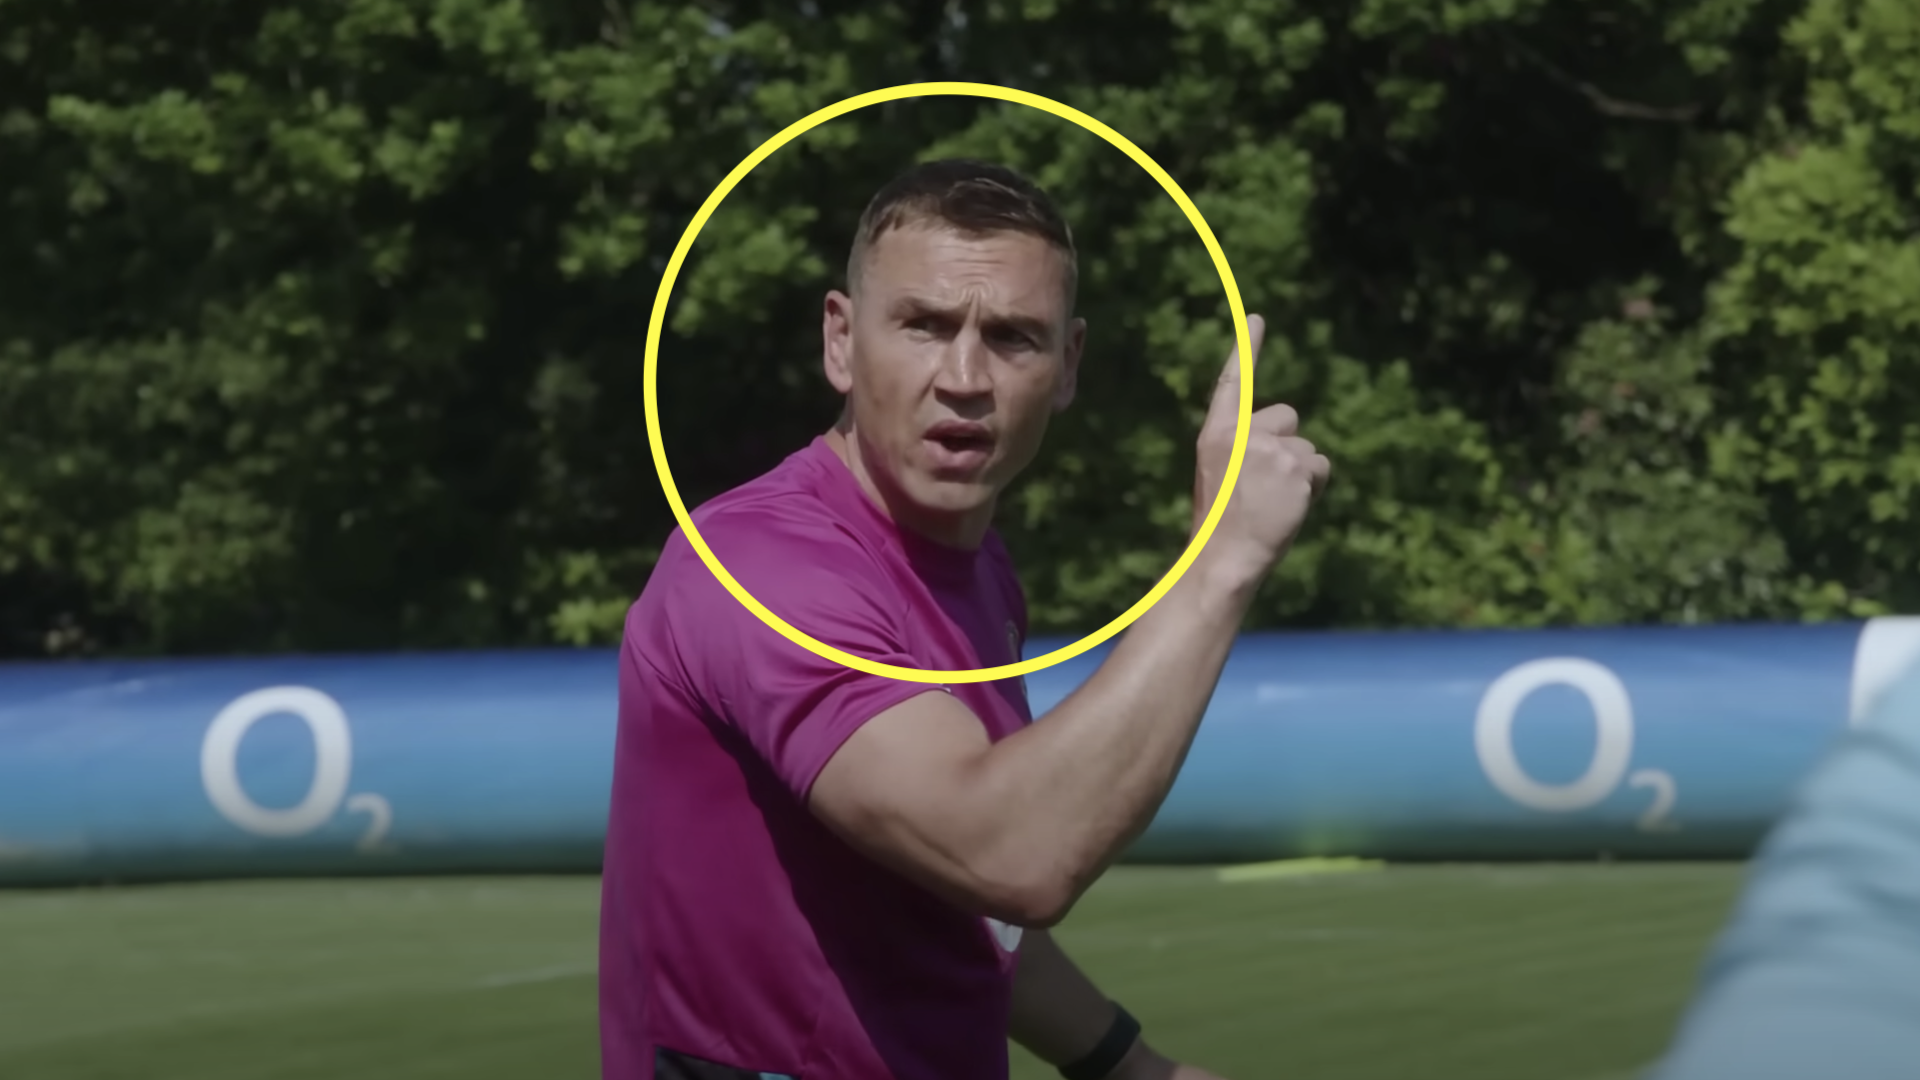 Kevin Sinfield set for shock career change to save England from RWC humiliation